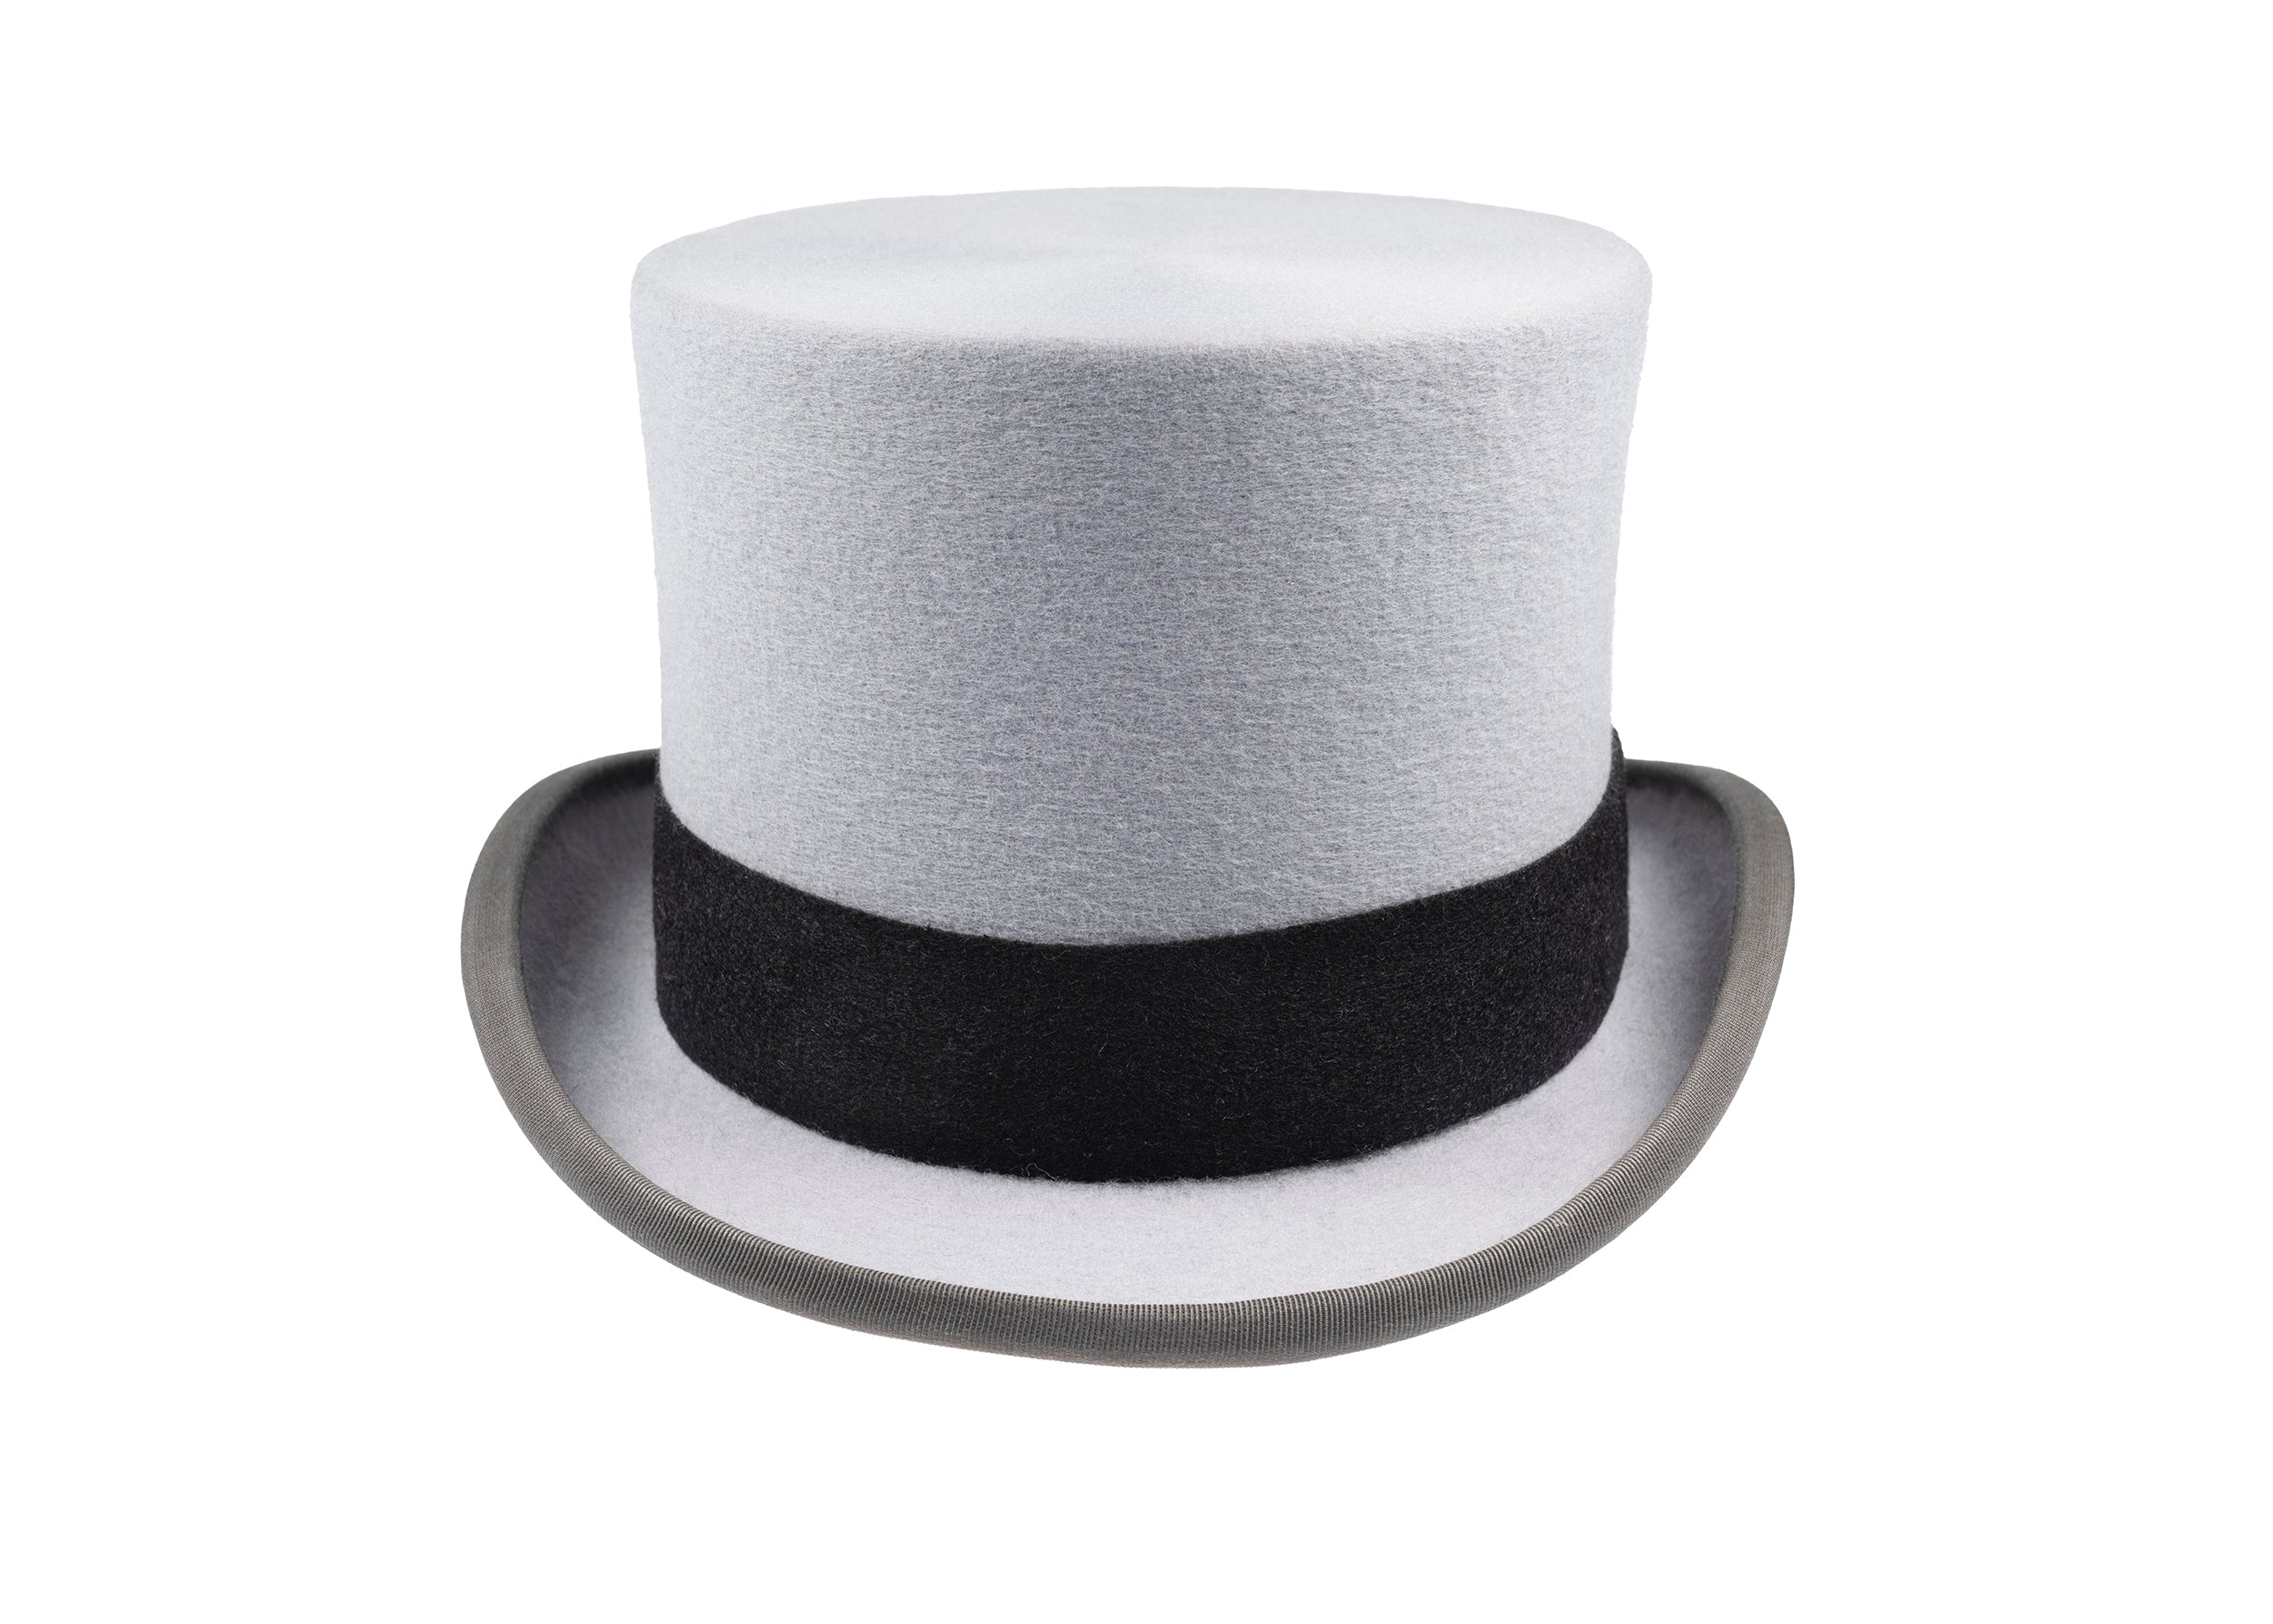 Best Wool Felt Hats Good Quality From China